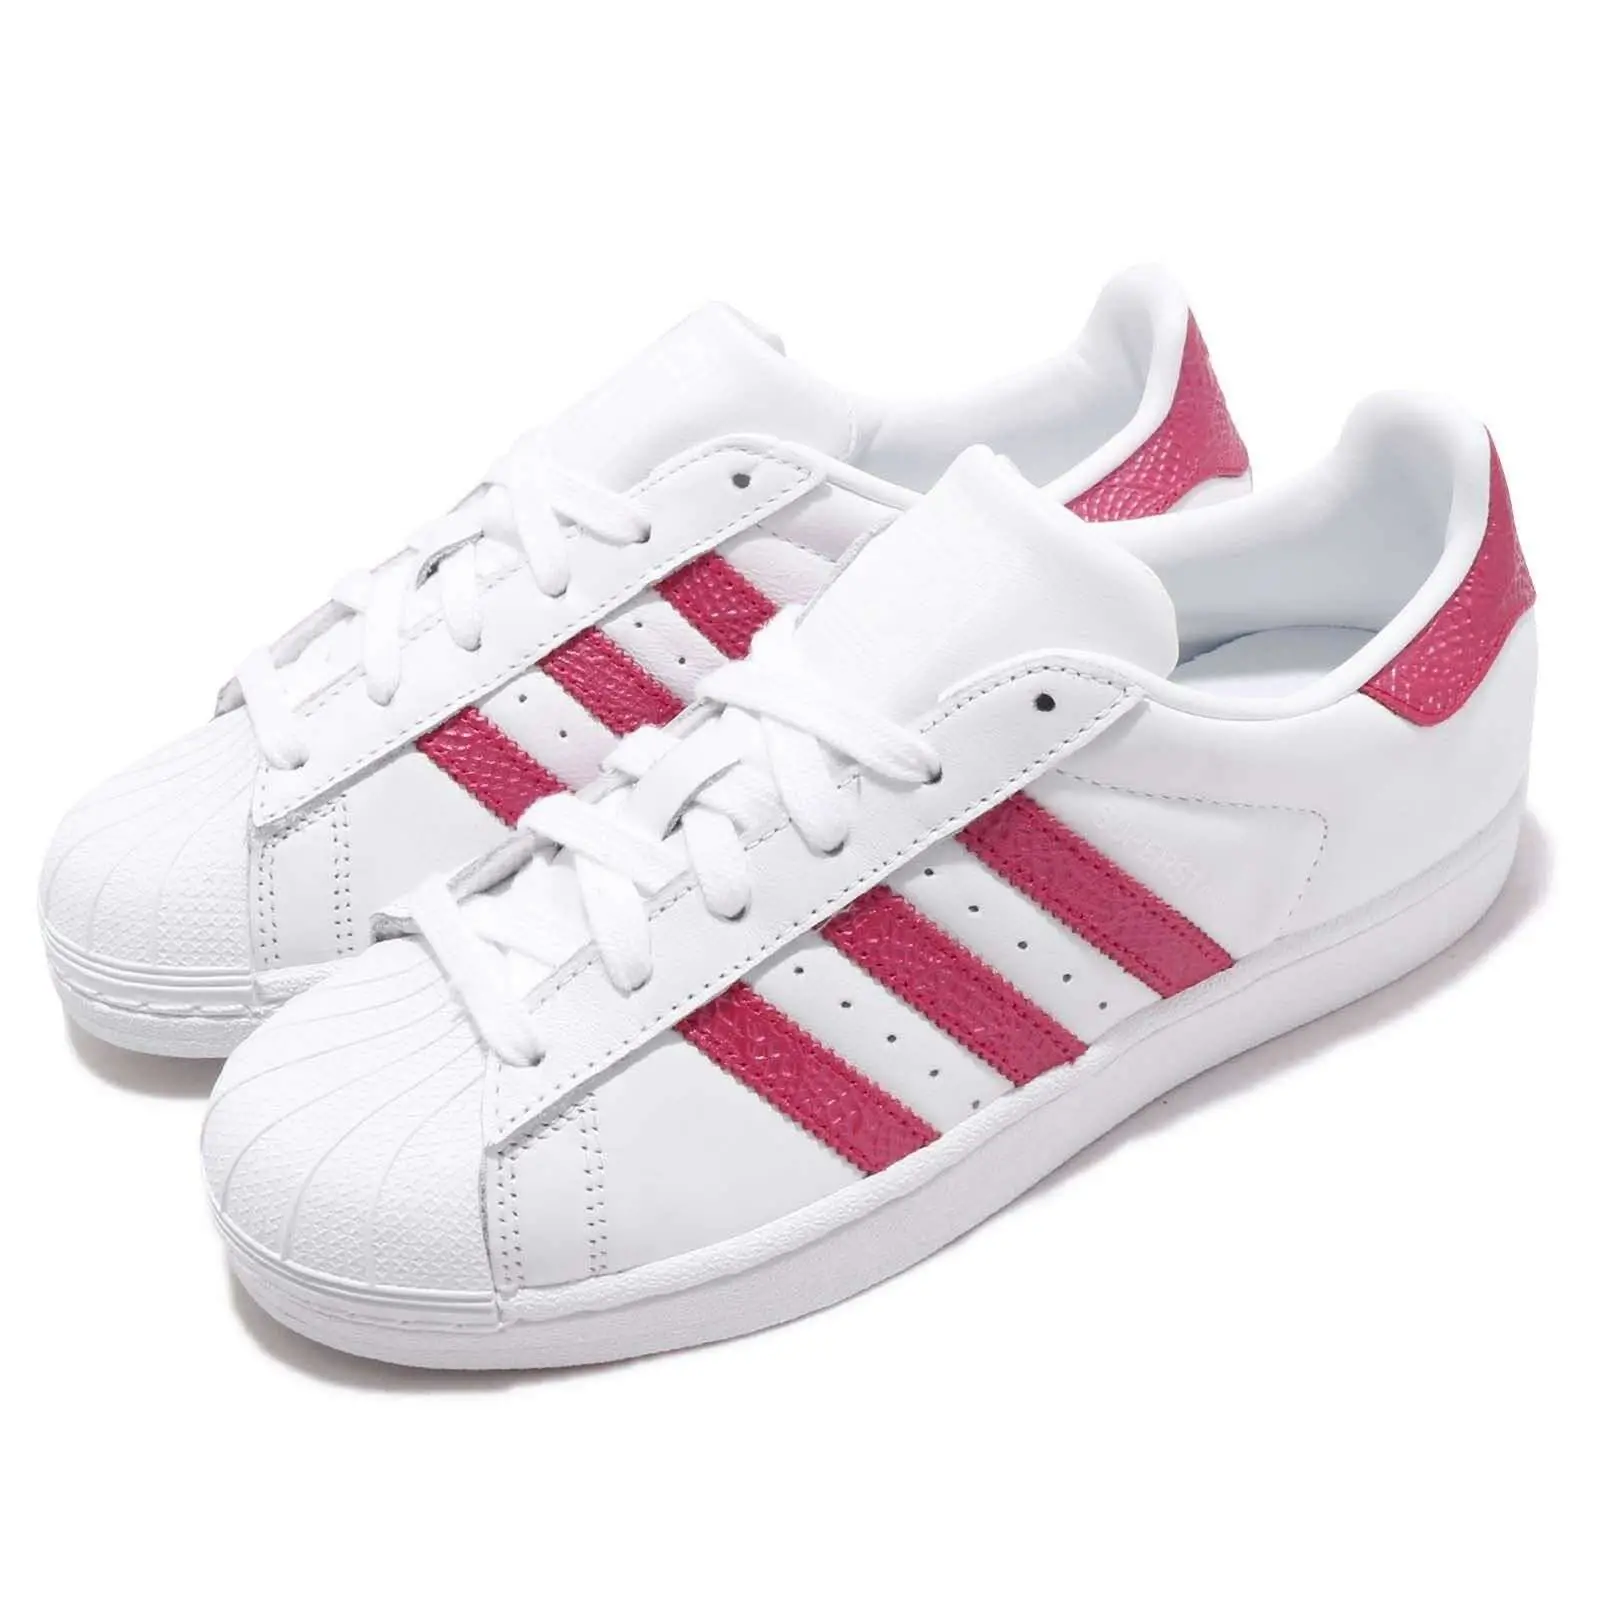 adidas Originals Superstar W White Pink Women Casual Shoes Sneakers ...